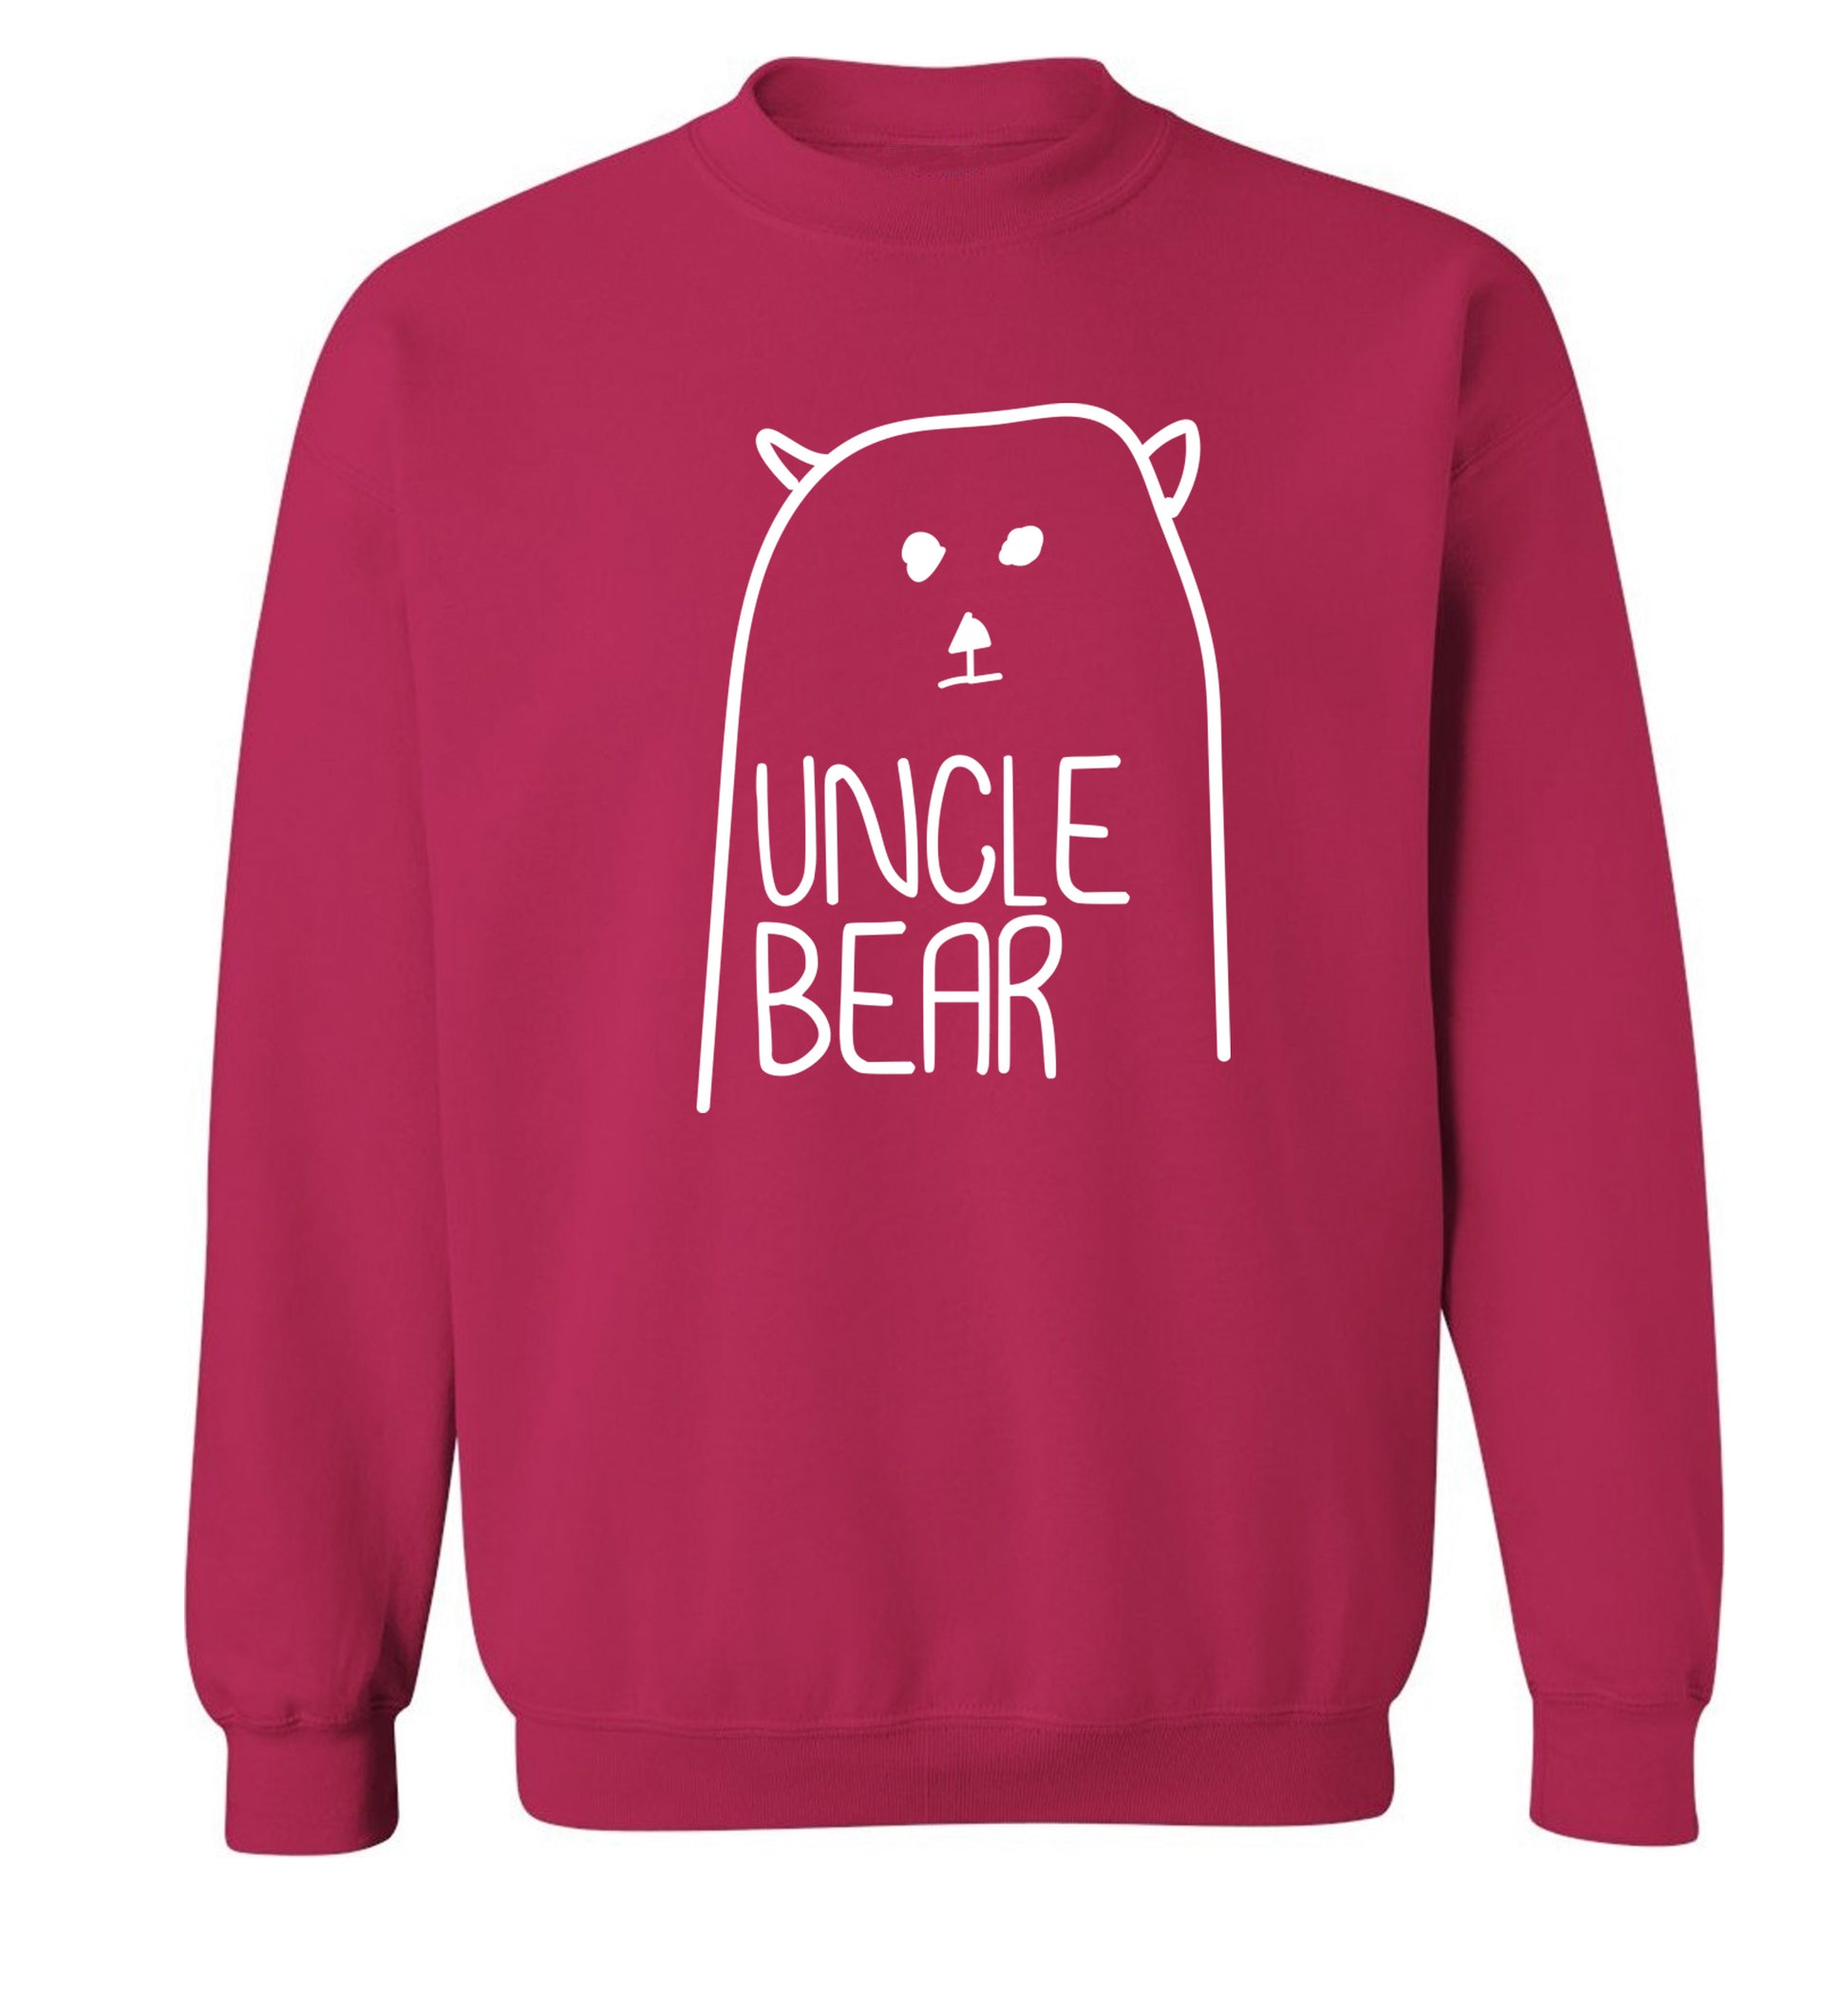 Uncle bear Adult's unisex pink Sweater 2XL